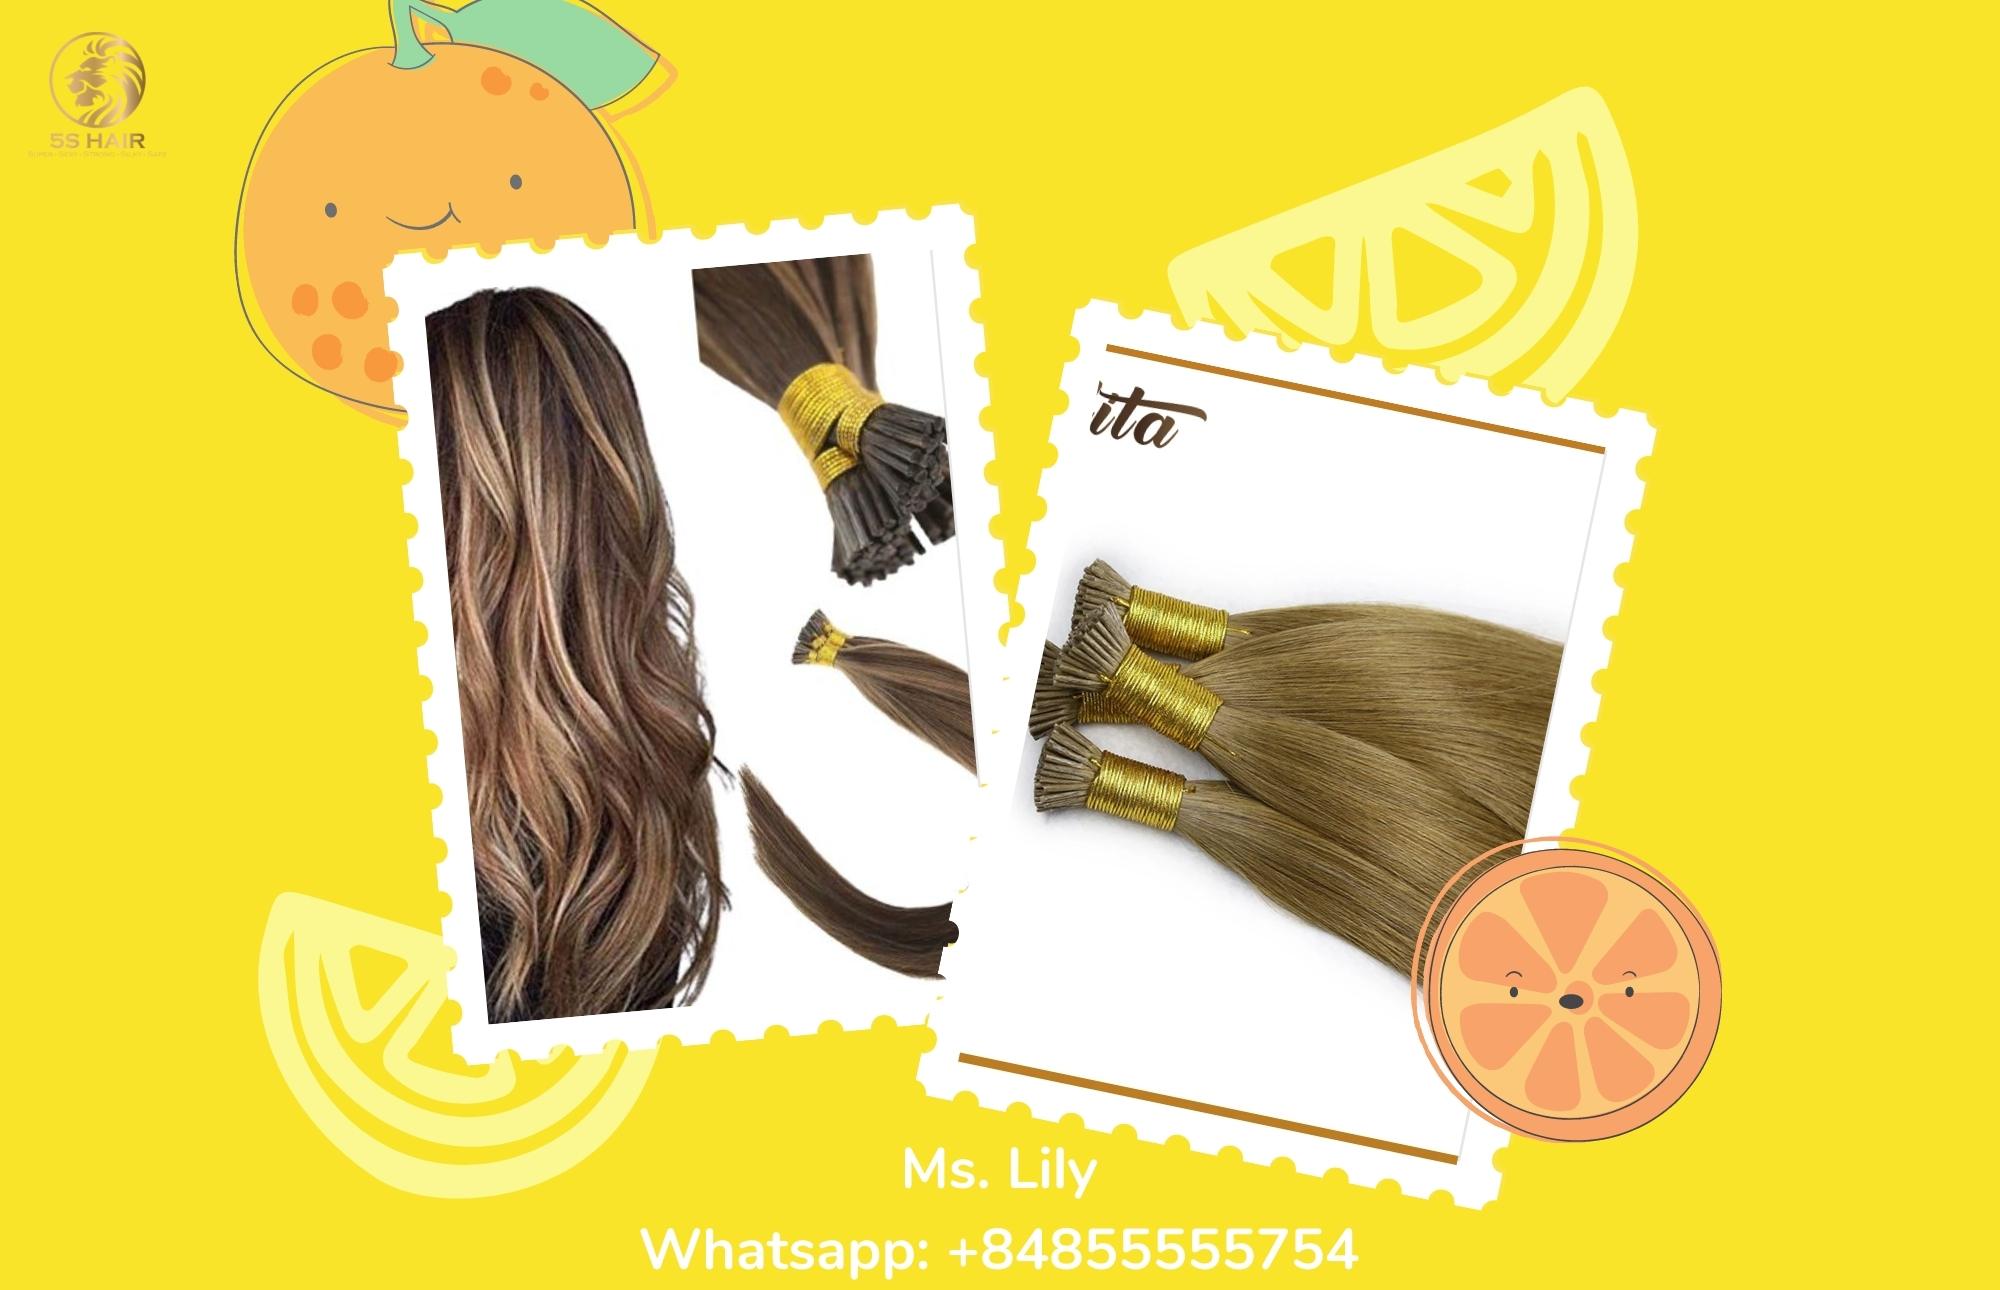 where-to-buy-wholesale-hair-extensions-for-beginners14